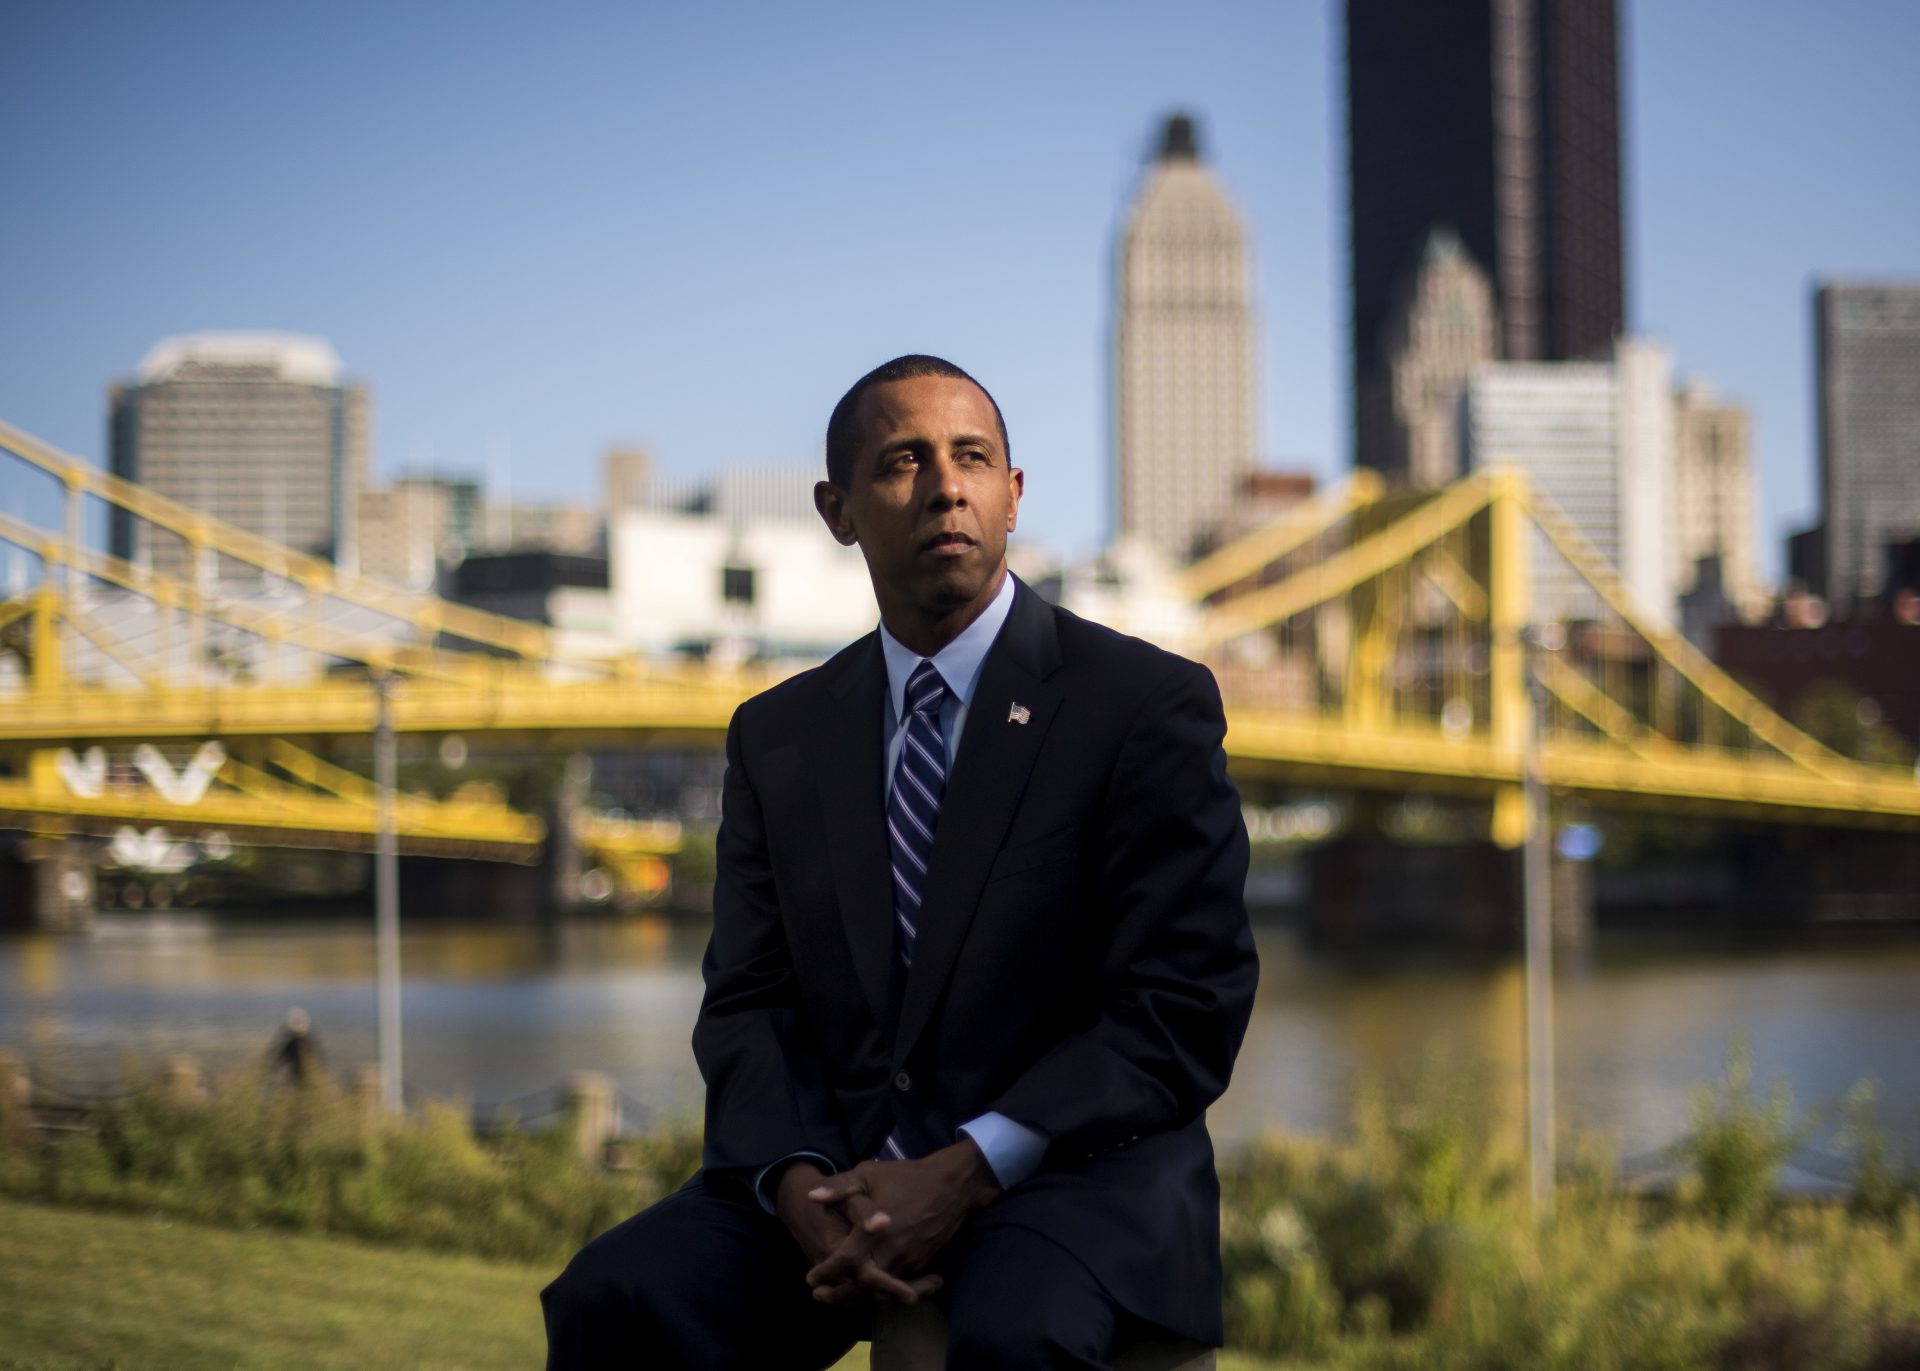 Lenny McCallister poses for a portrait on Pittsburgh's North Shore on Monday, September 21, 2020.